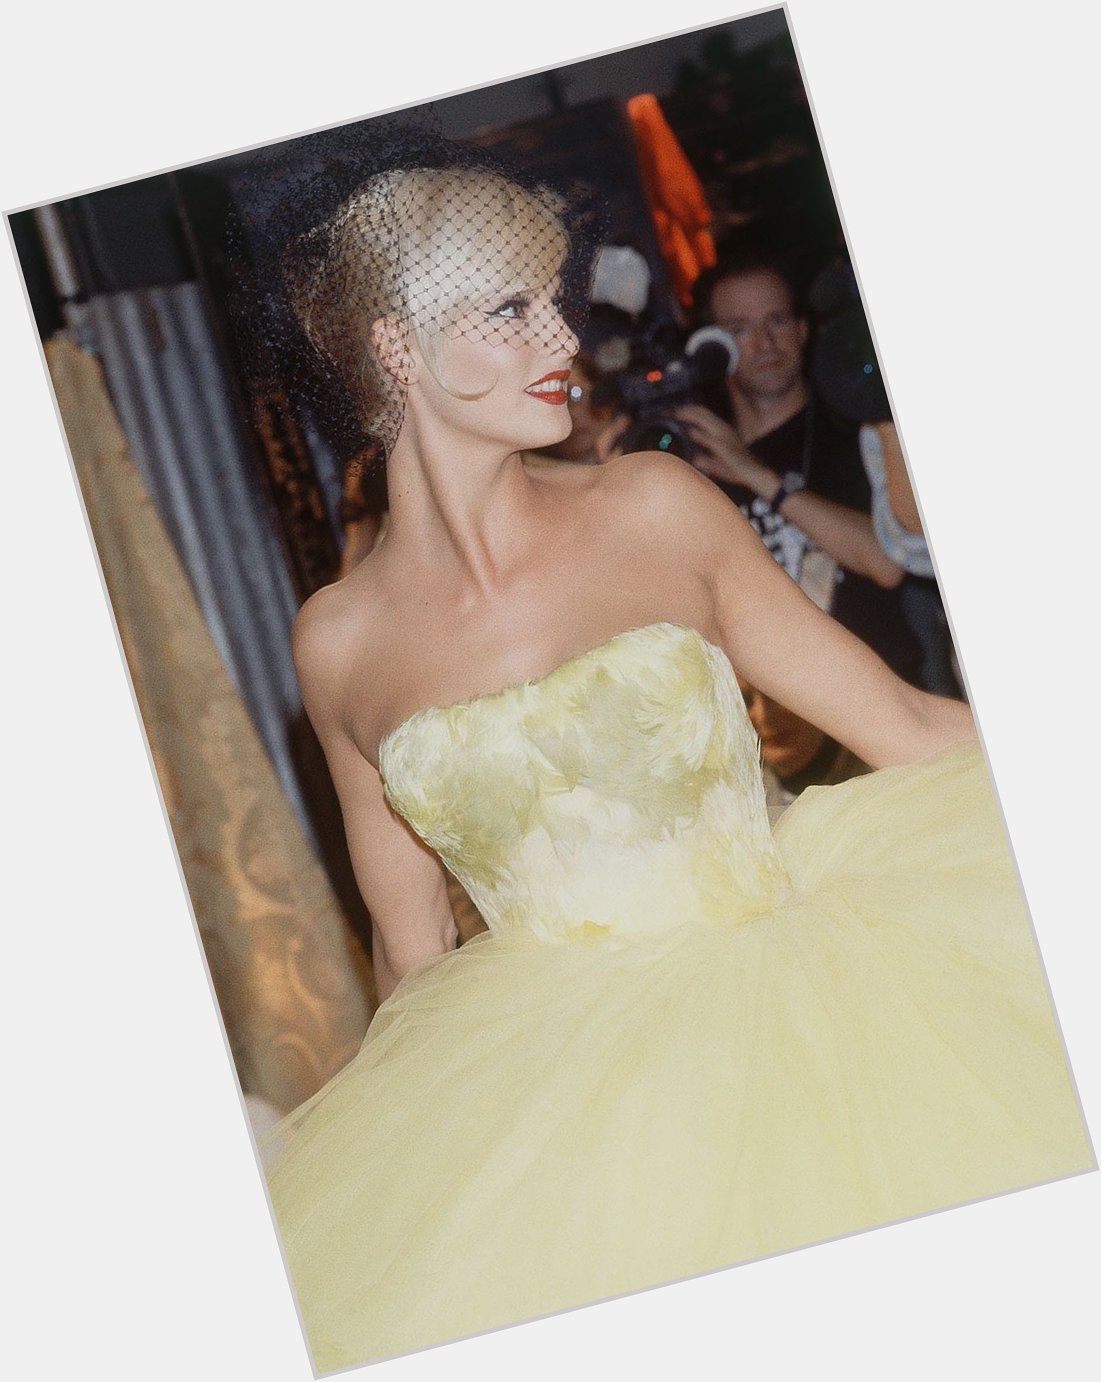 Happy birthday to iconic Canadian queen Linda Evangelista. Here backstage at John Galliano spring 1995 